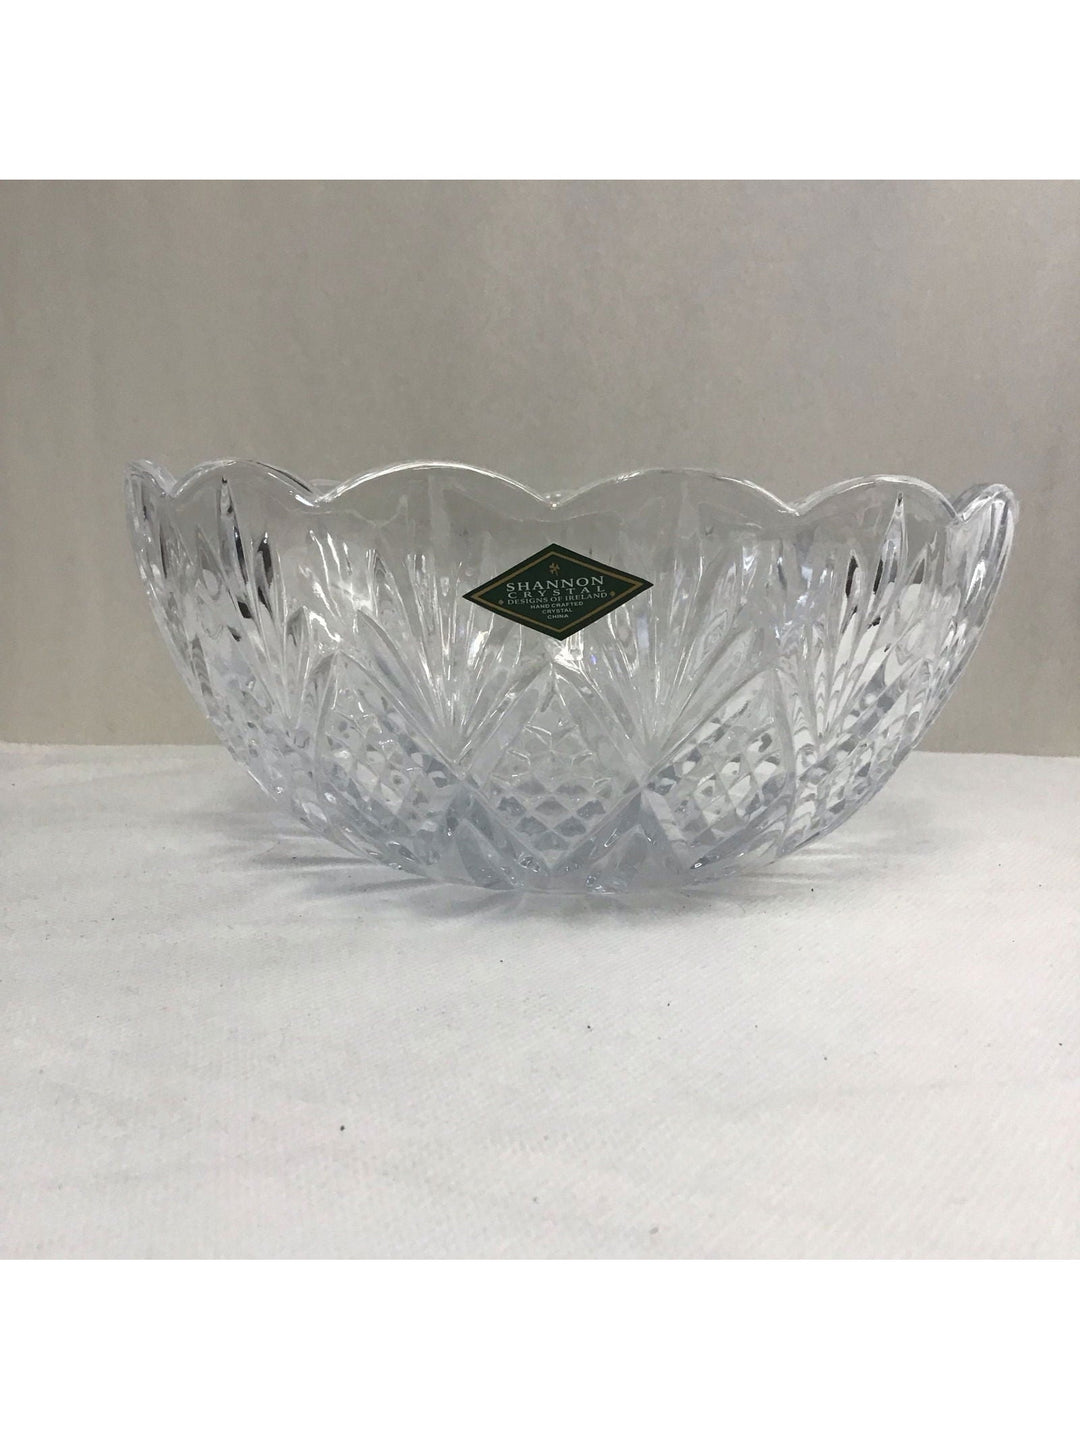 Dublin Shannon Crystal Bowl - The Kennedy Collective Thrift - 